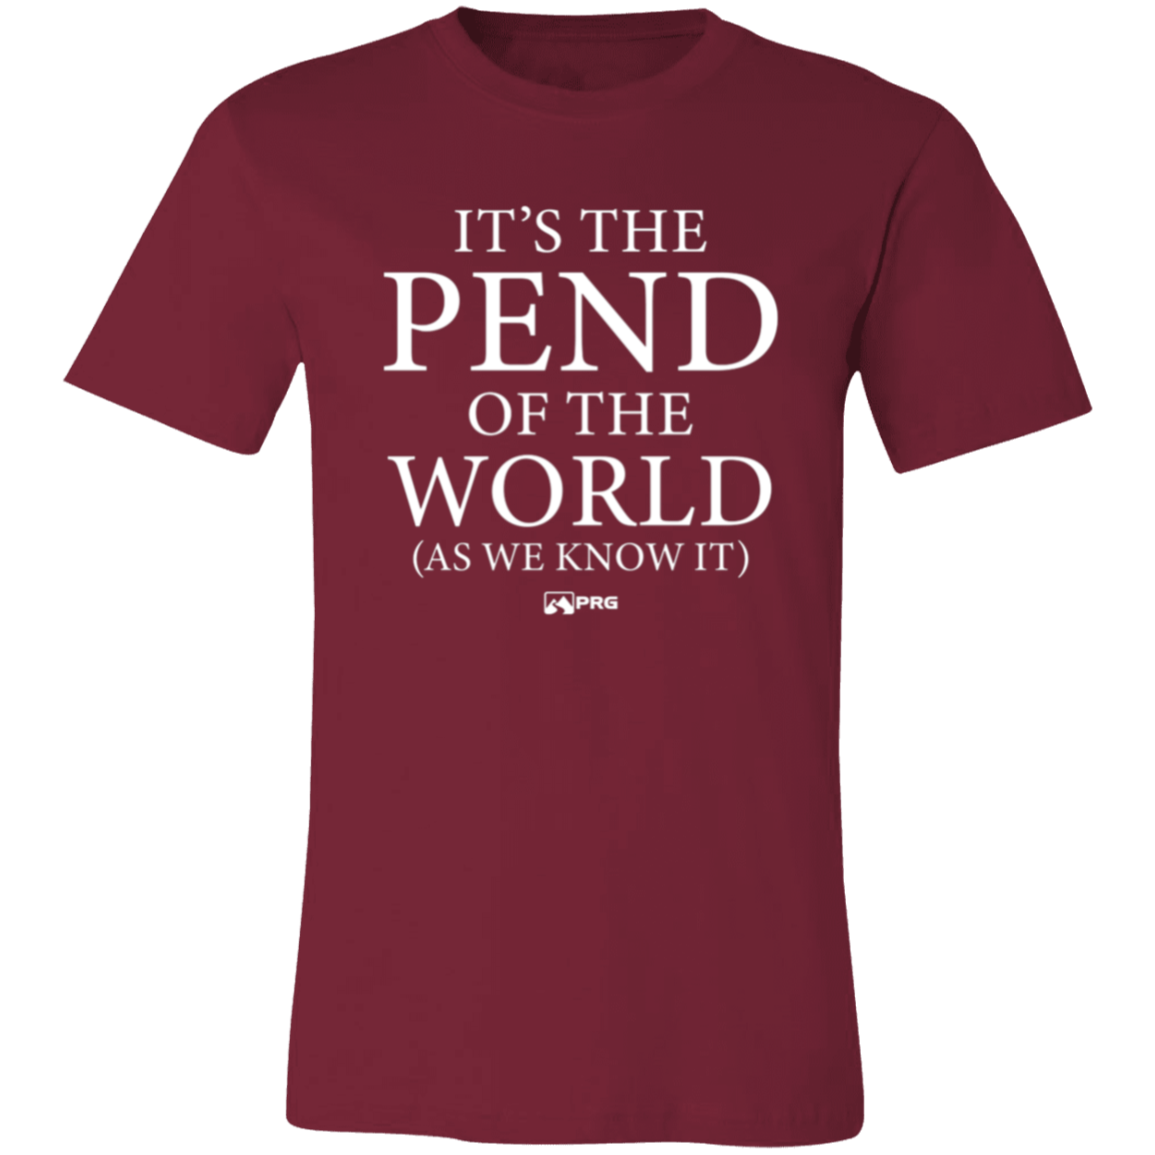 Pend of the World - Shirt